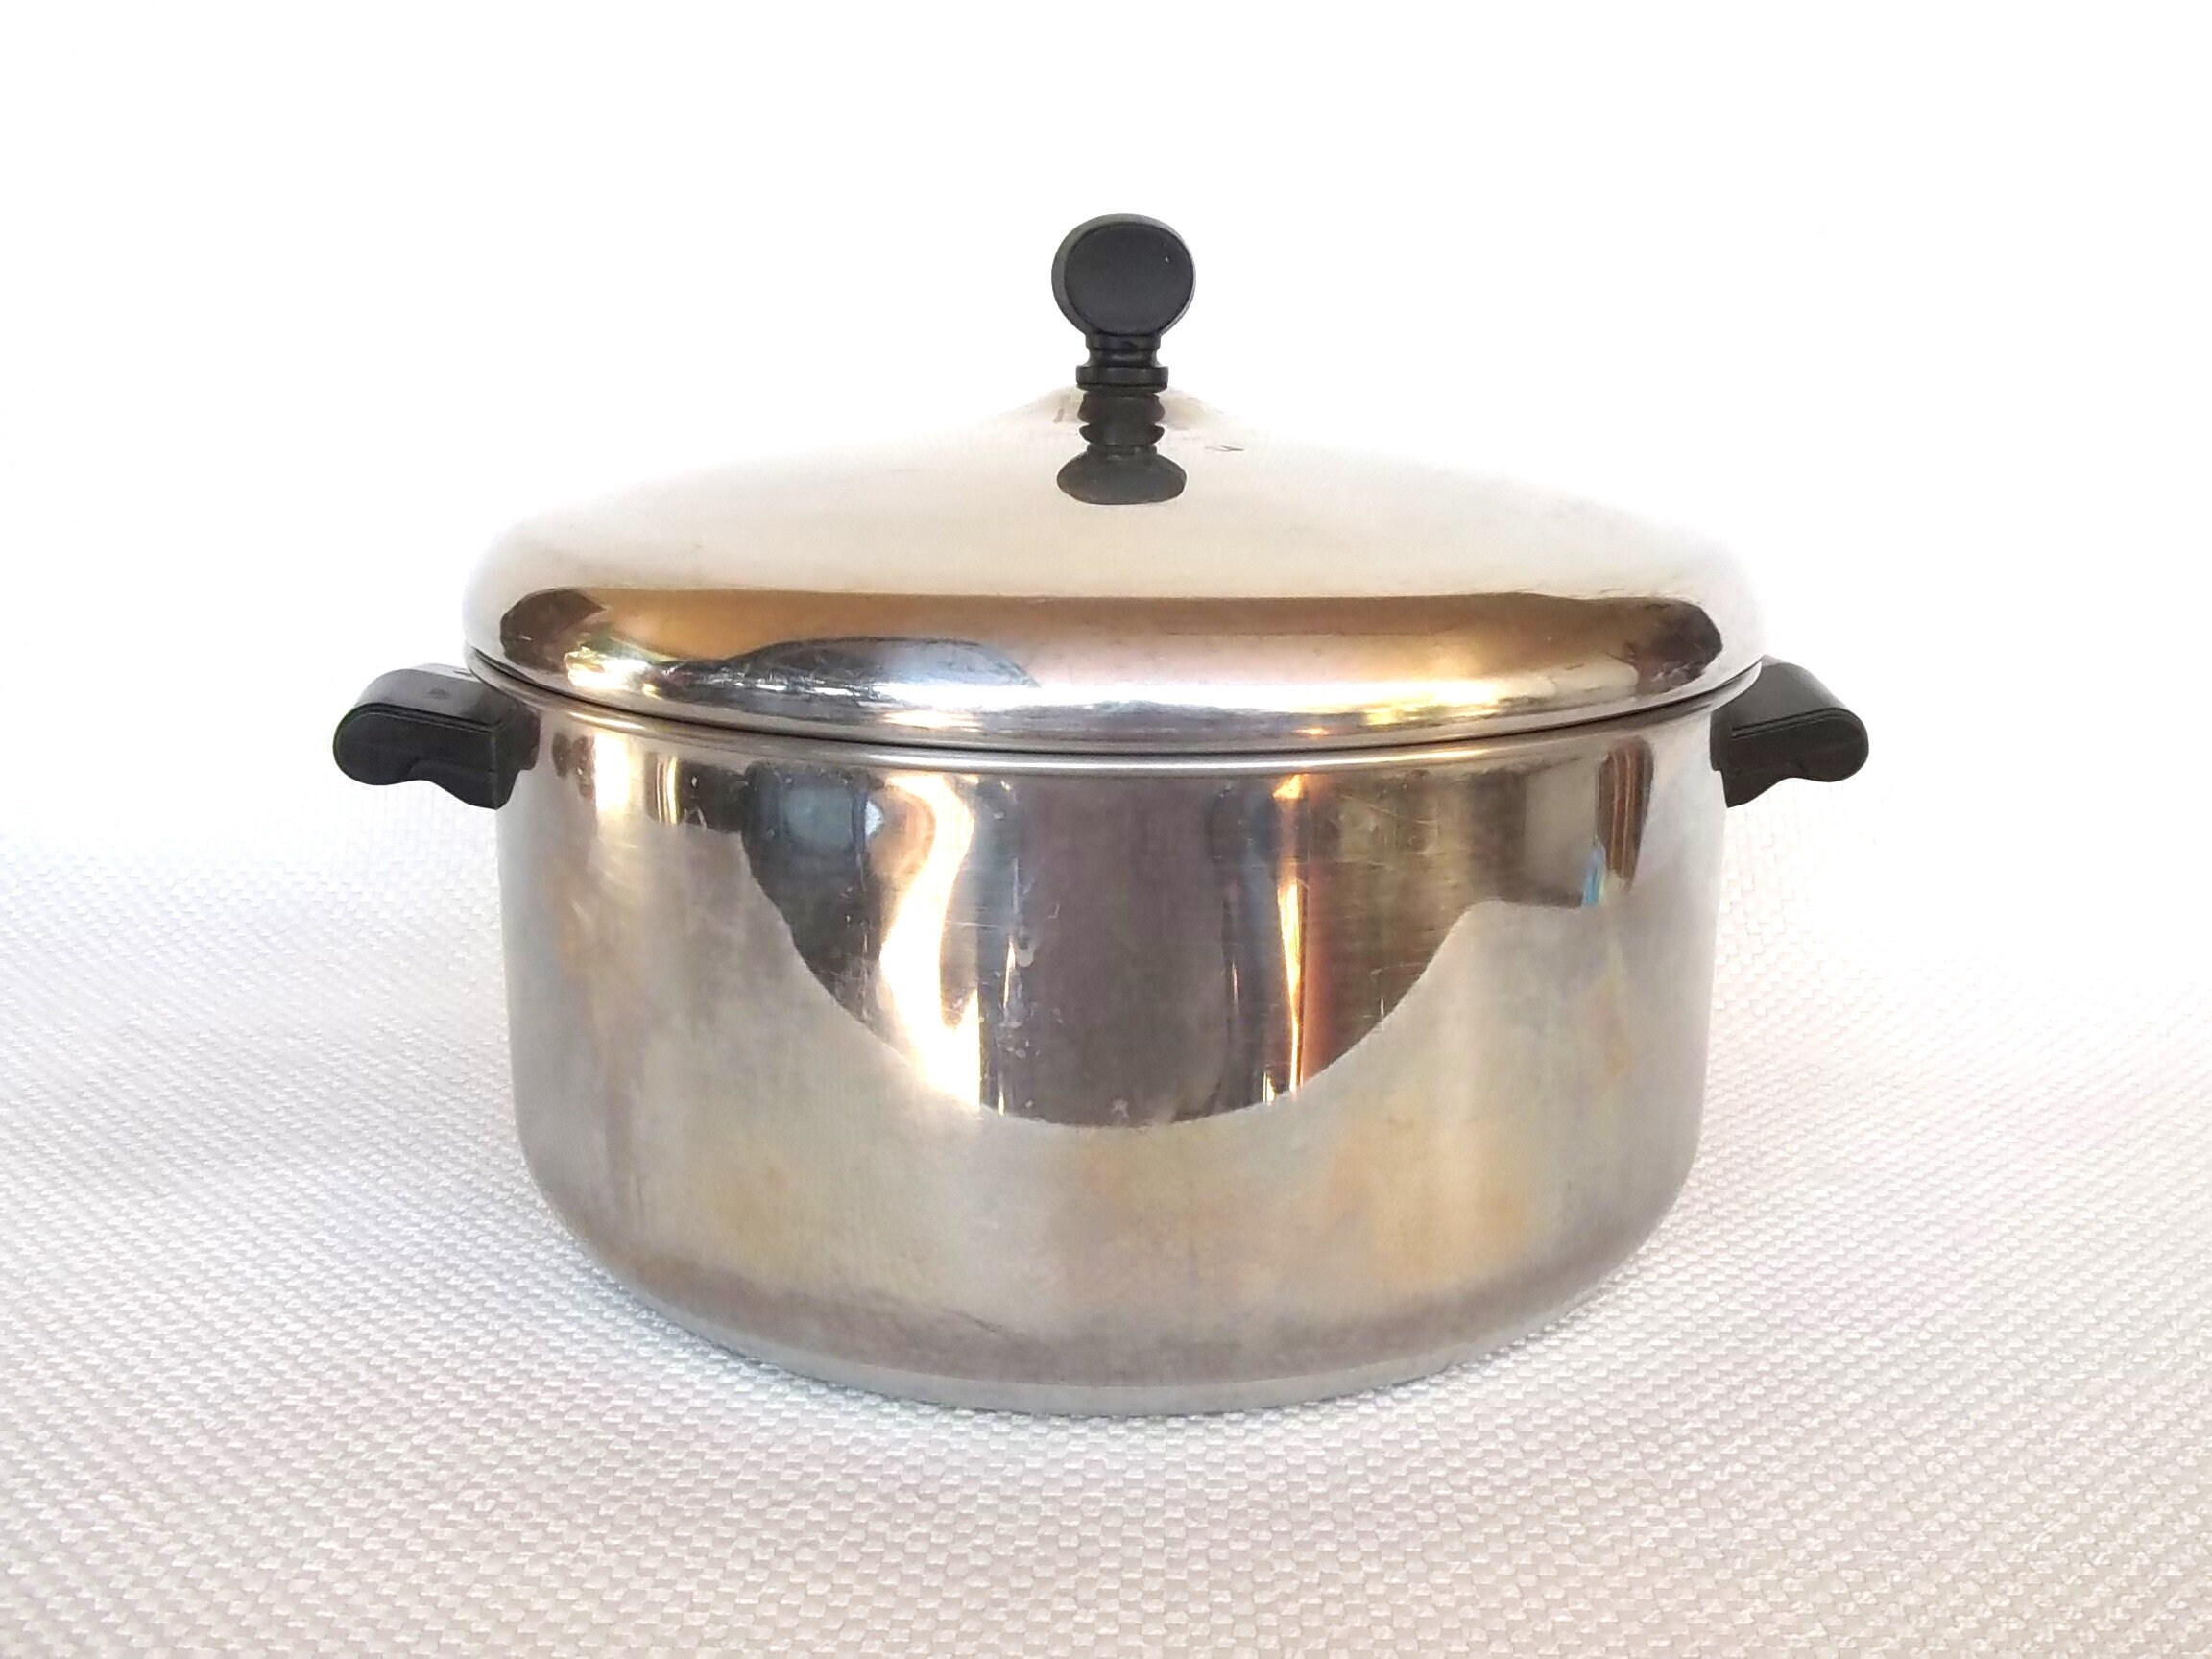 Vntg REGAL stainless steel domed 6.75" sauce pan pot replace lid diamond handle 